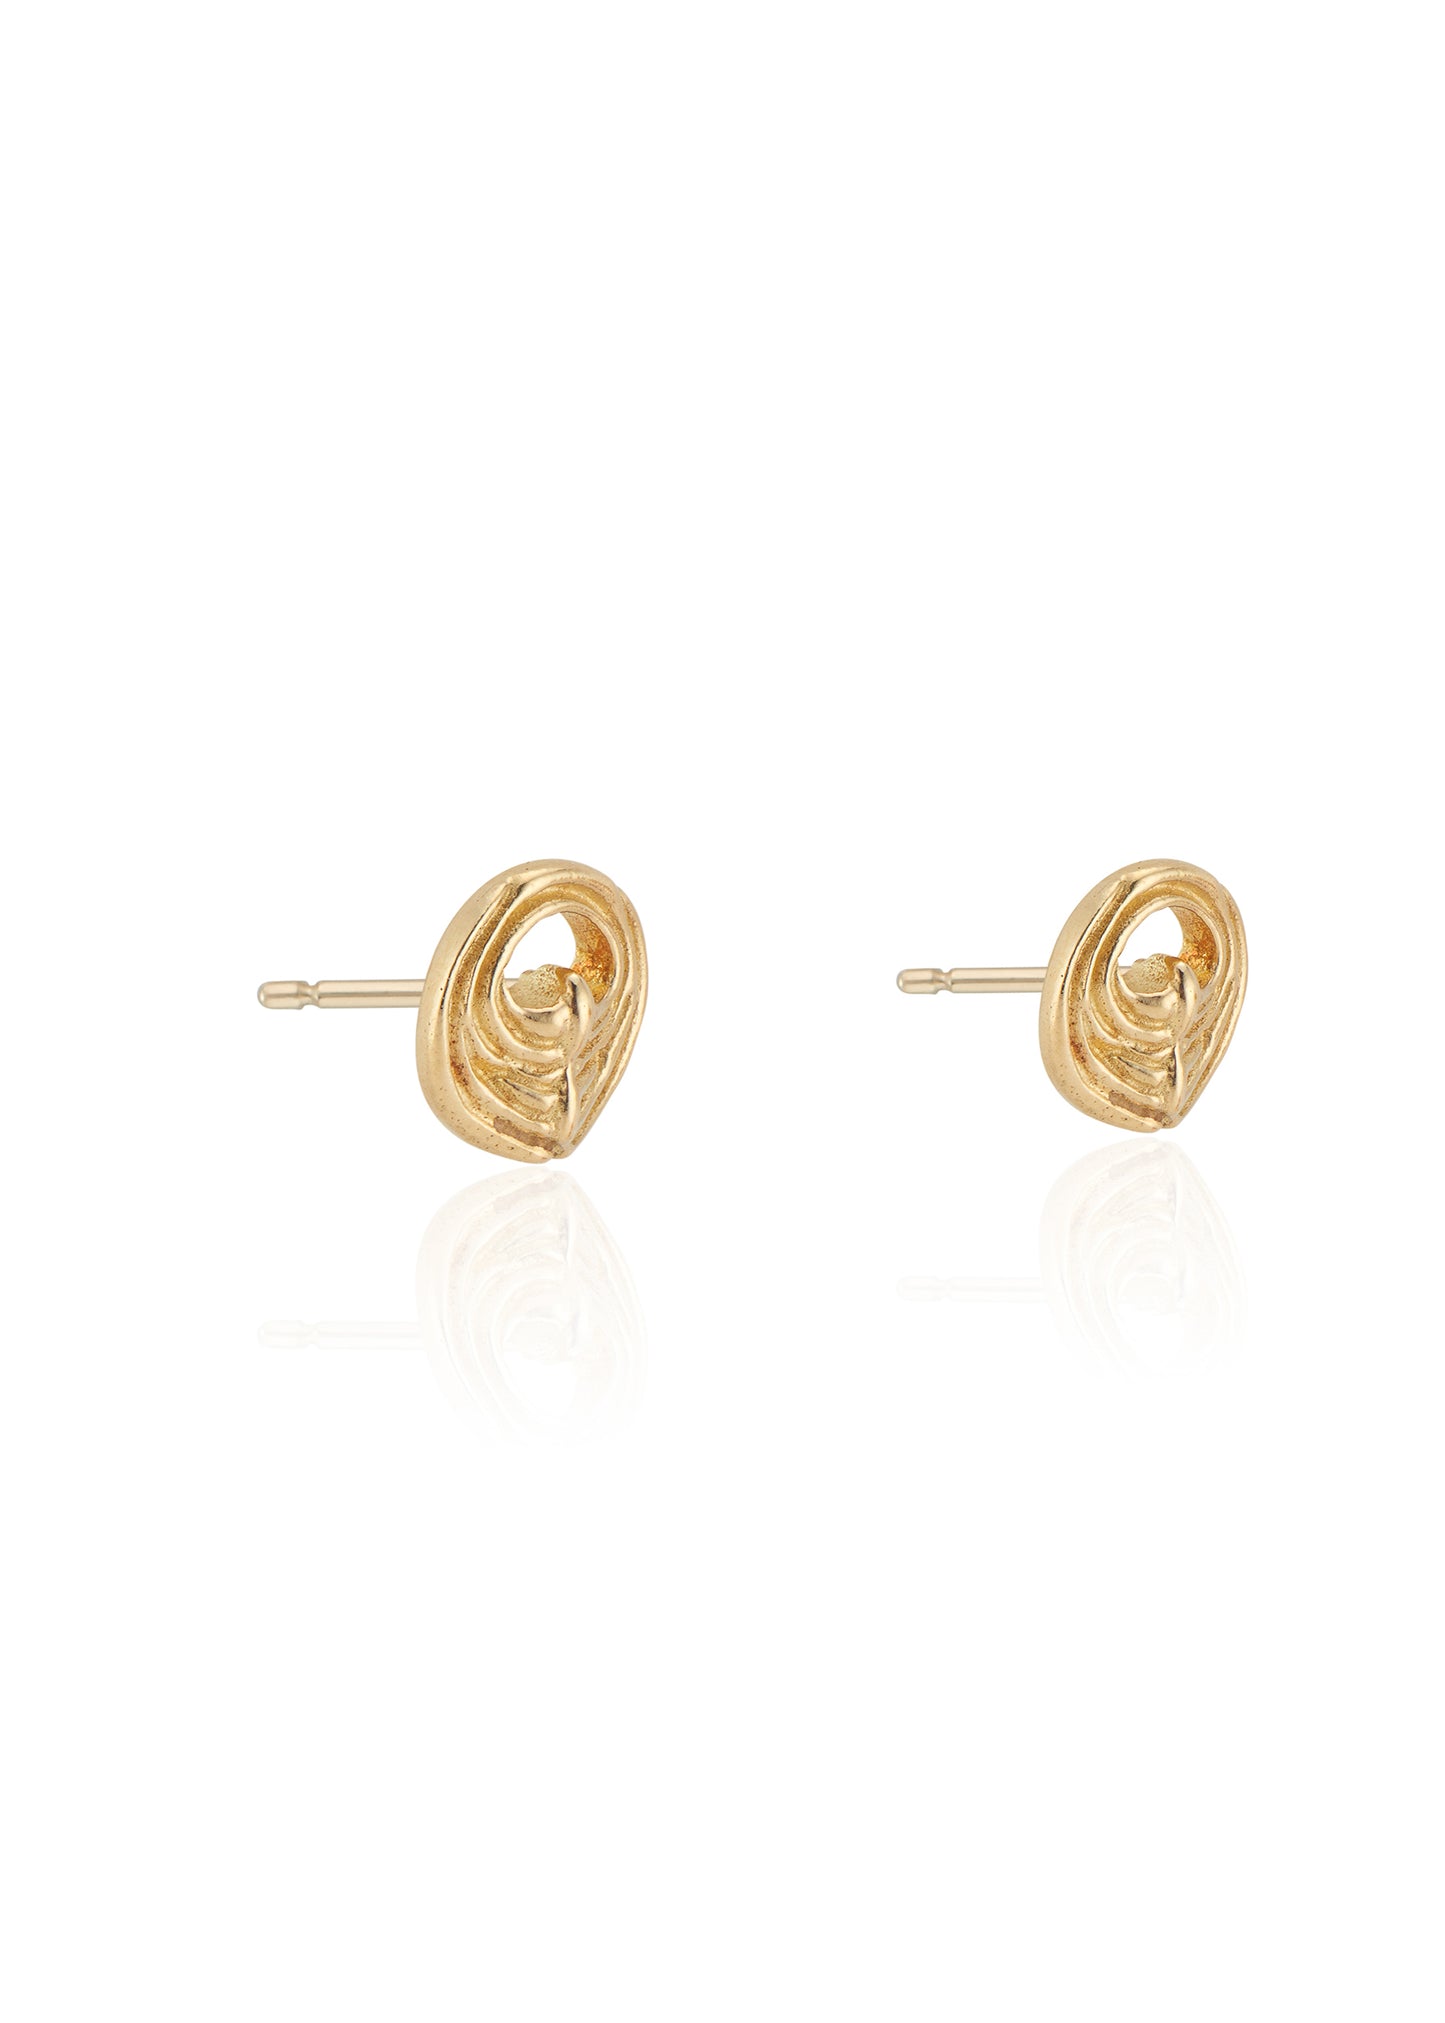 A nod to the impenetrable strength of the feminine spirit, the Shield earring merges strong lines with gentle sloping curves—a hand-crafted study of power and grace, of substance and elegance. 